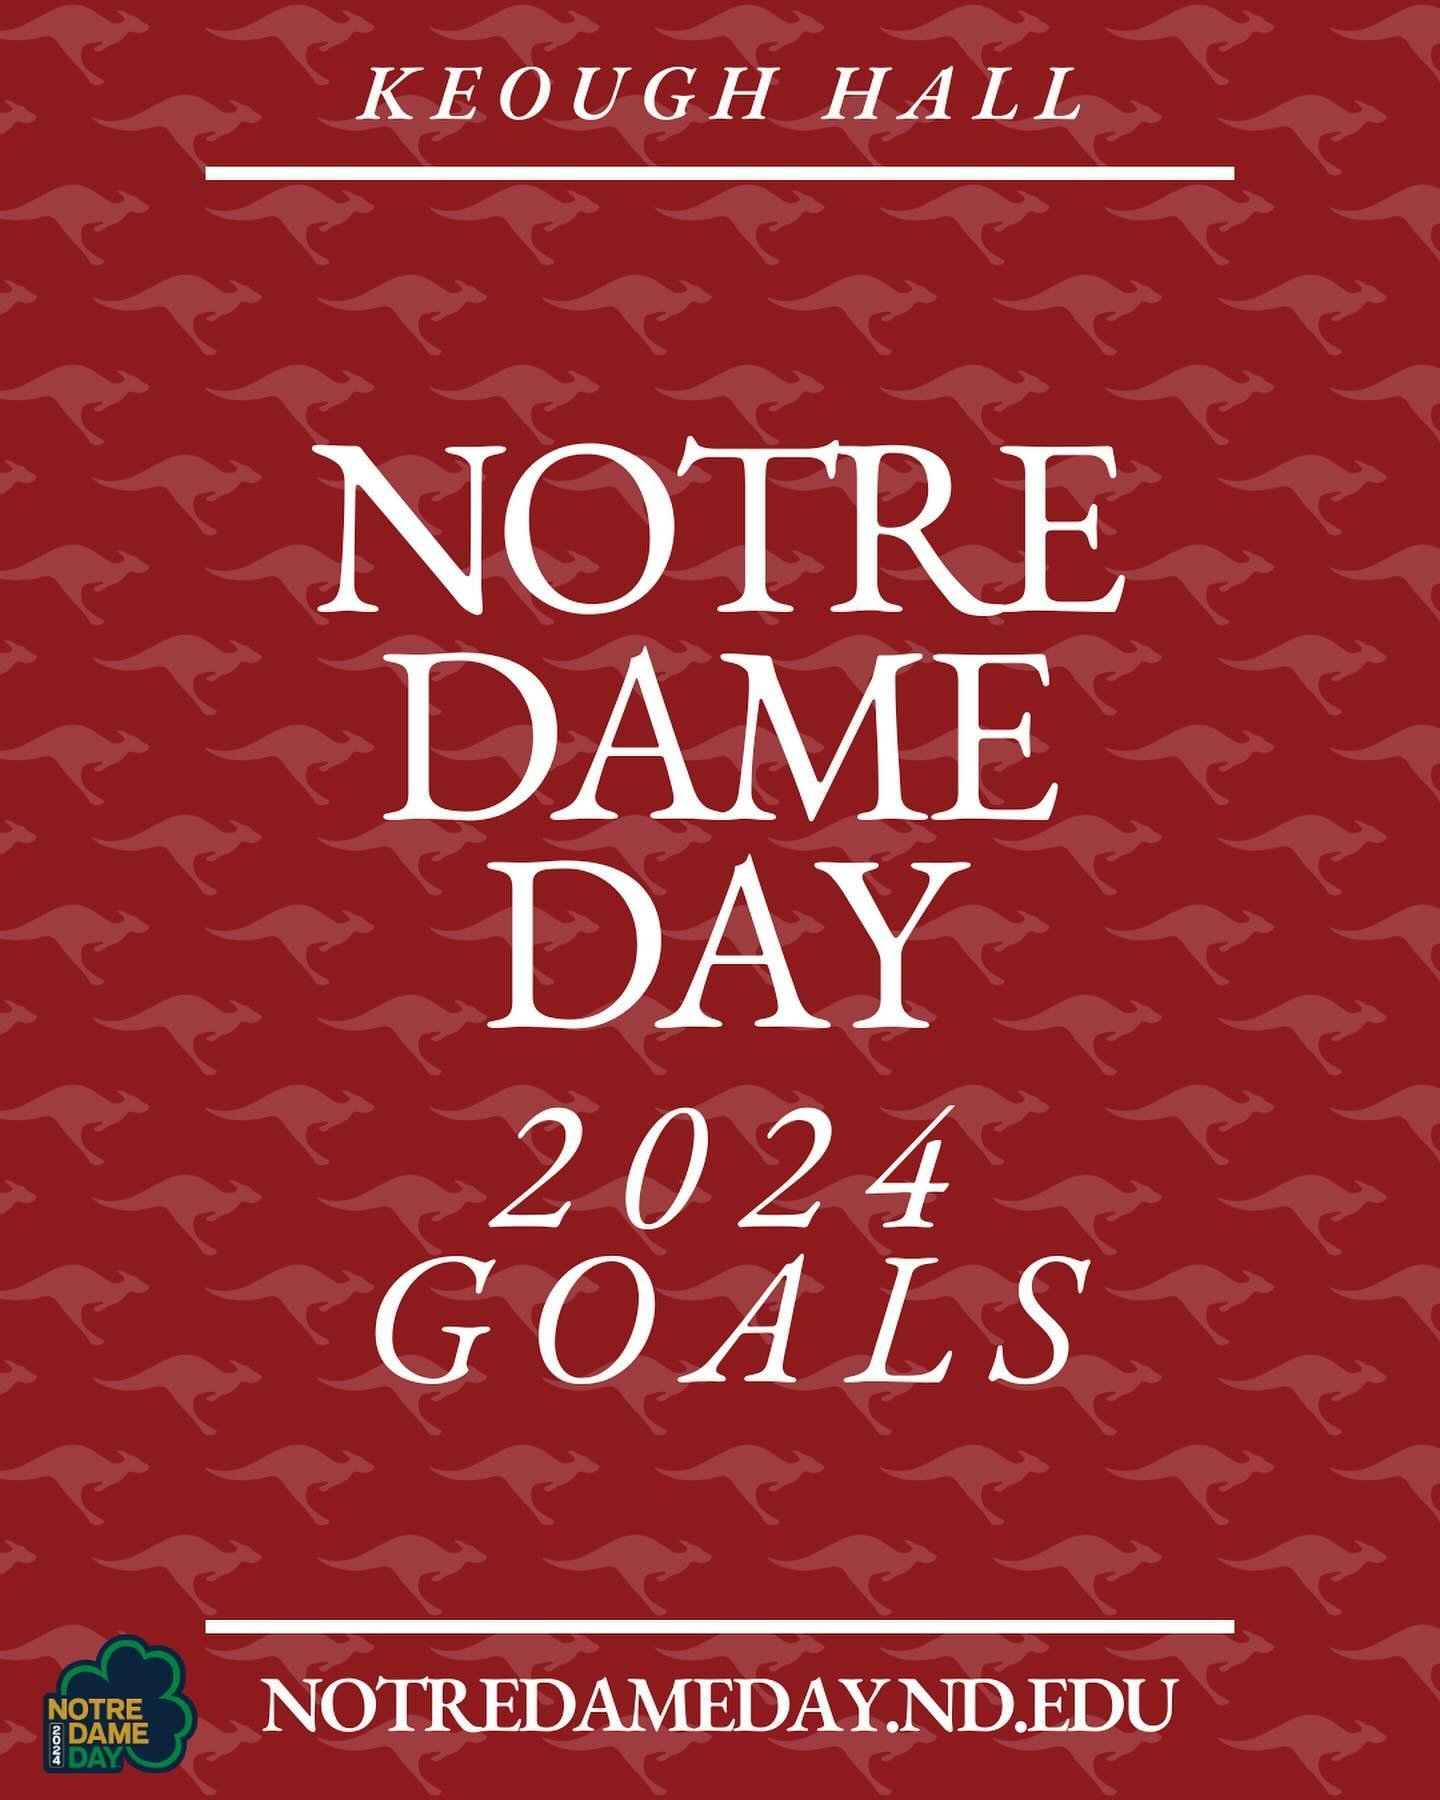 Notre Dame Day is ONE DAY AWAY! 

Wondering how your donations will benefit Keough Hall? 🦘 Read our top three Goals for next year! 

@ndloyal 

#Keough #NDDay2024